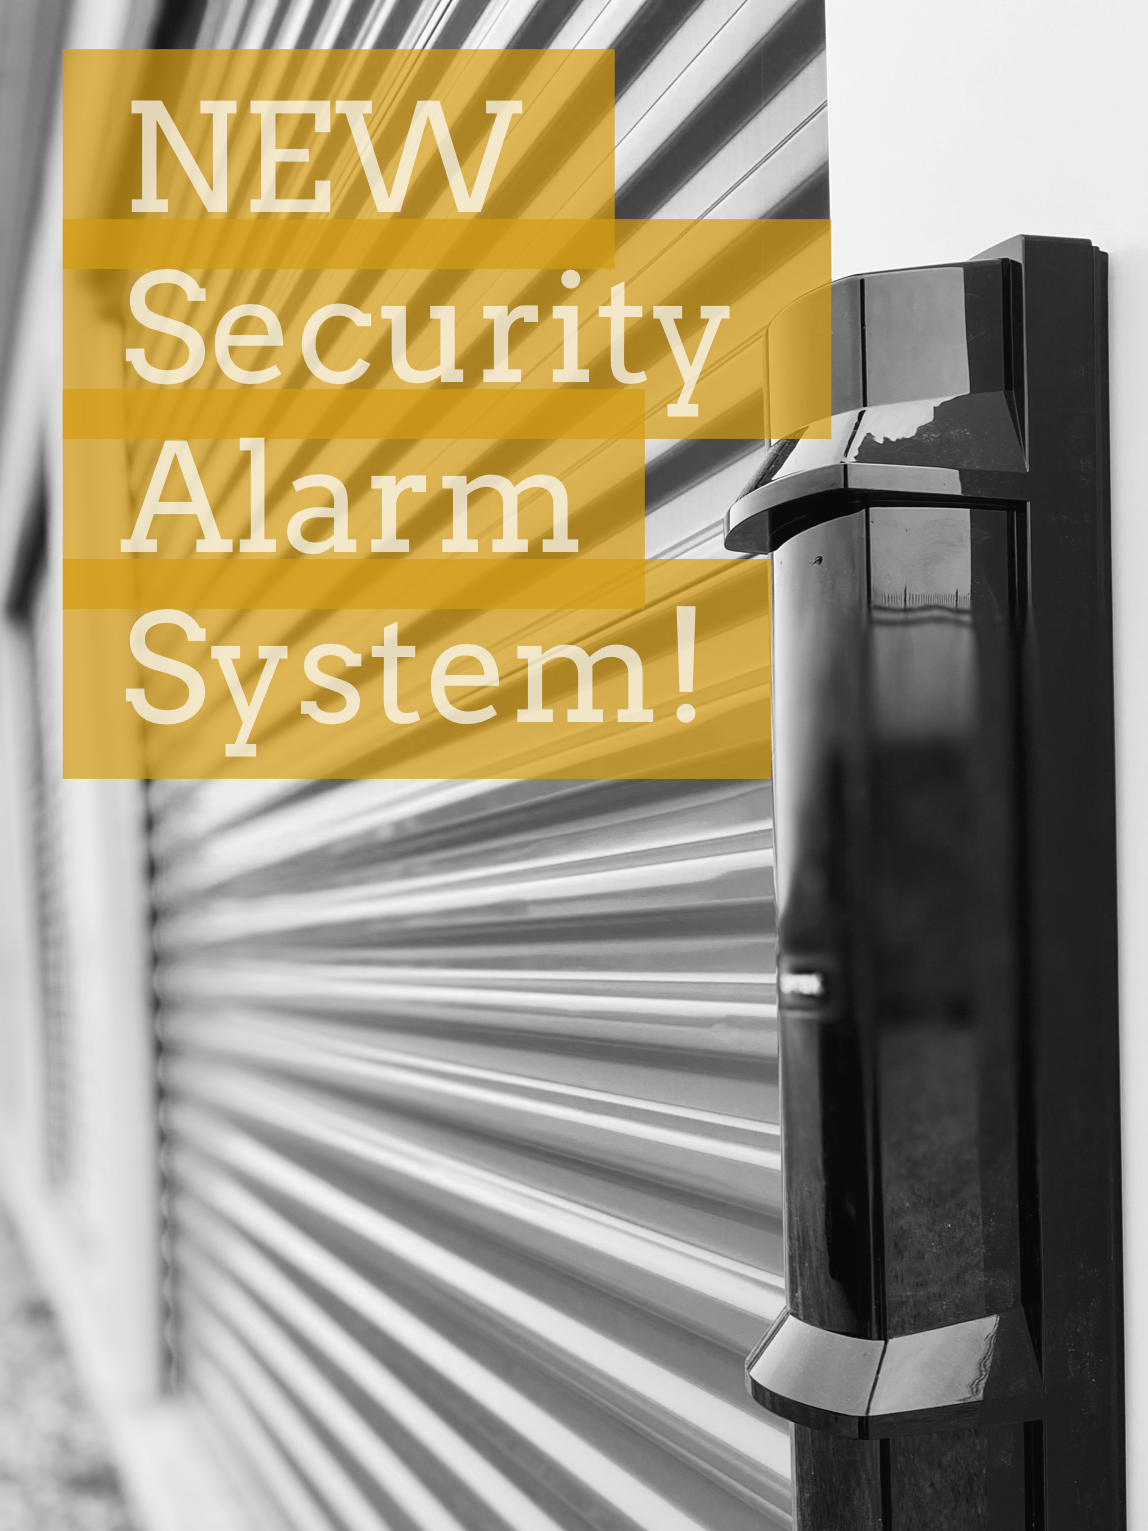 High River Storage - Security System